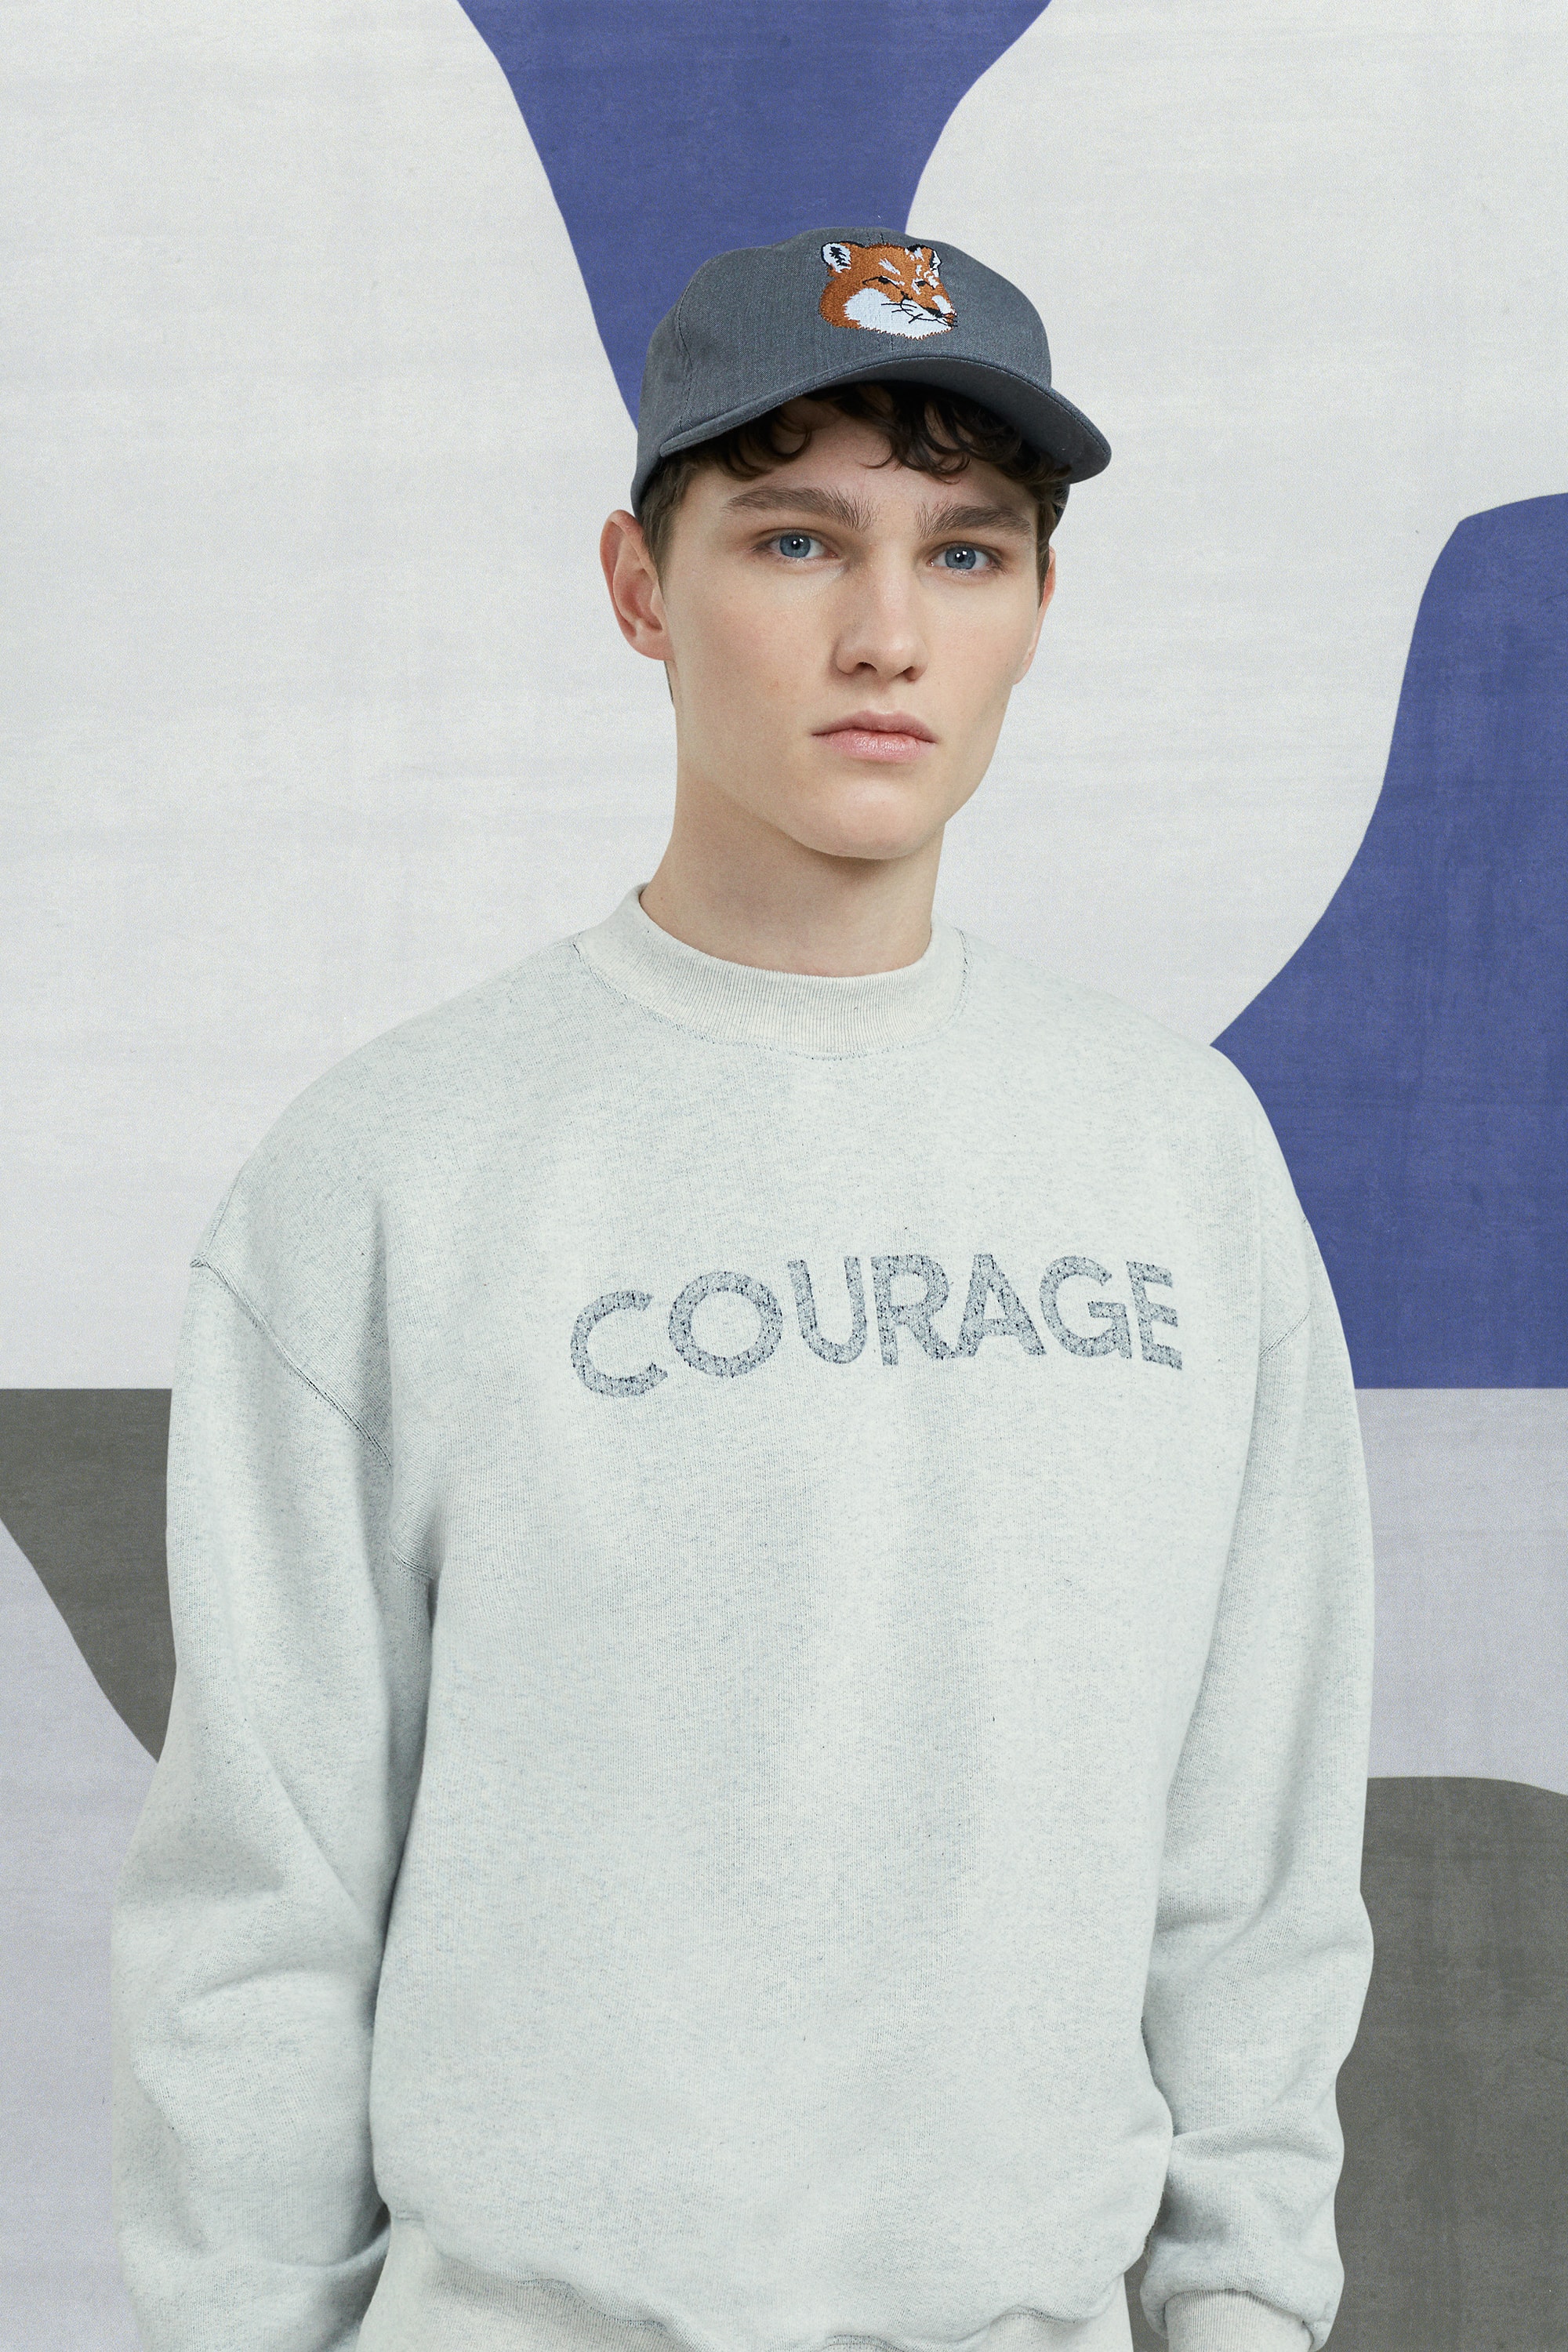 Maison Kitsune 2017 2018 Fall Winter Collection Formidable Courage